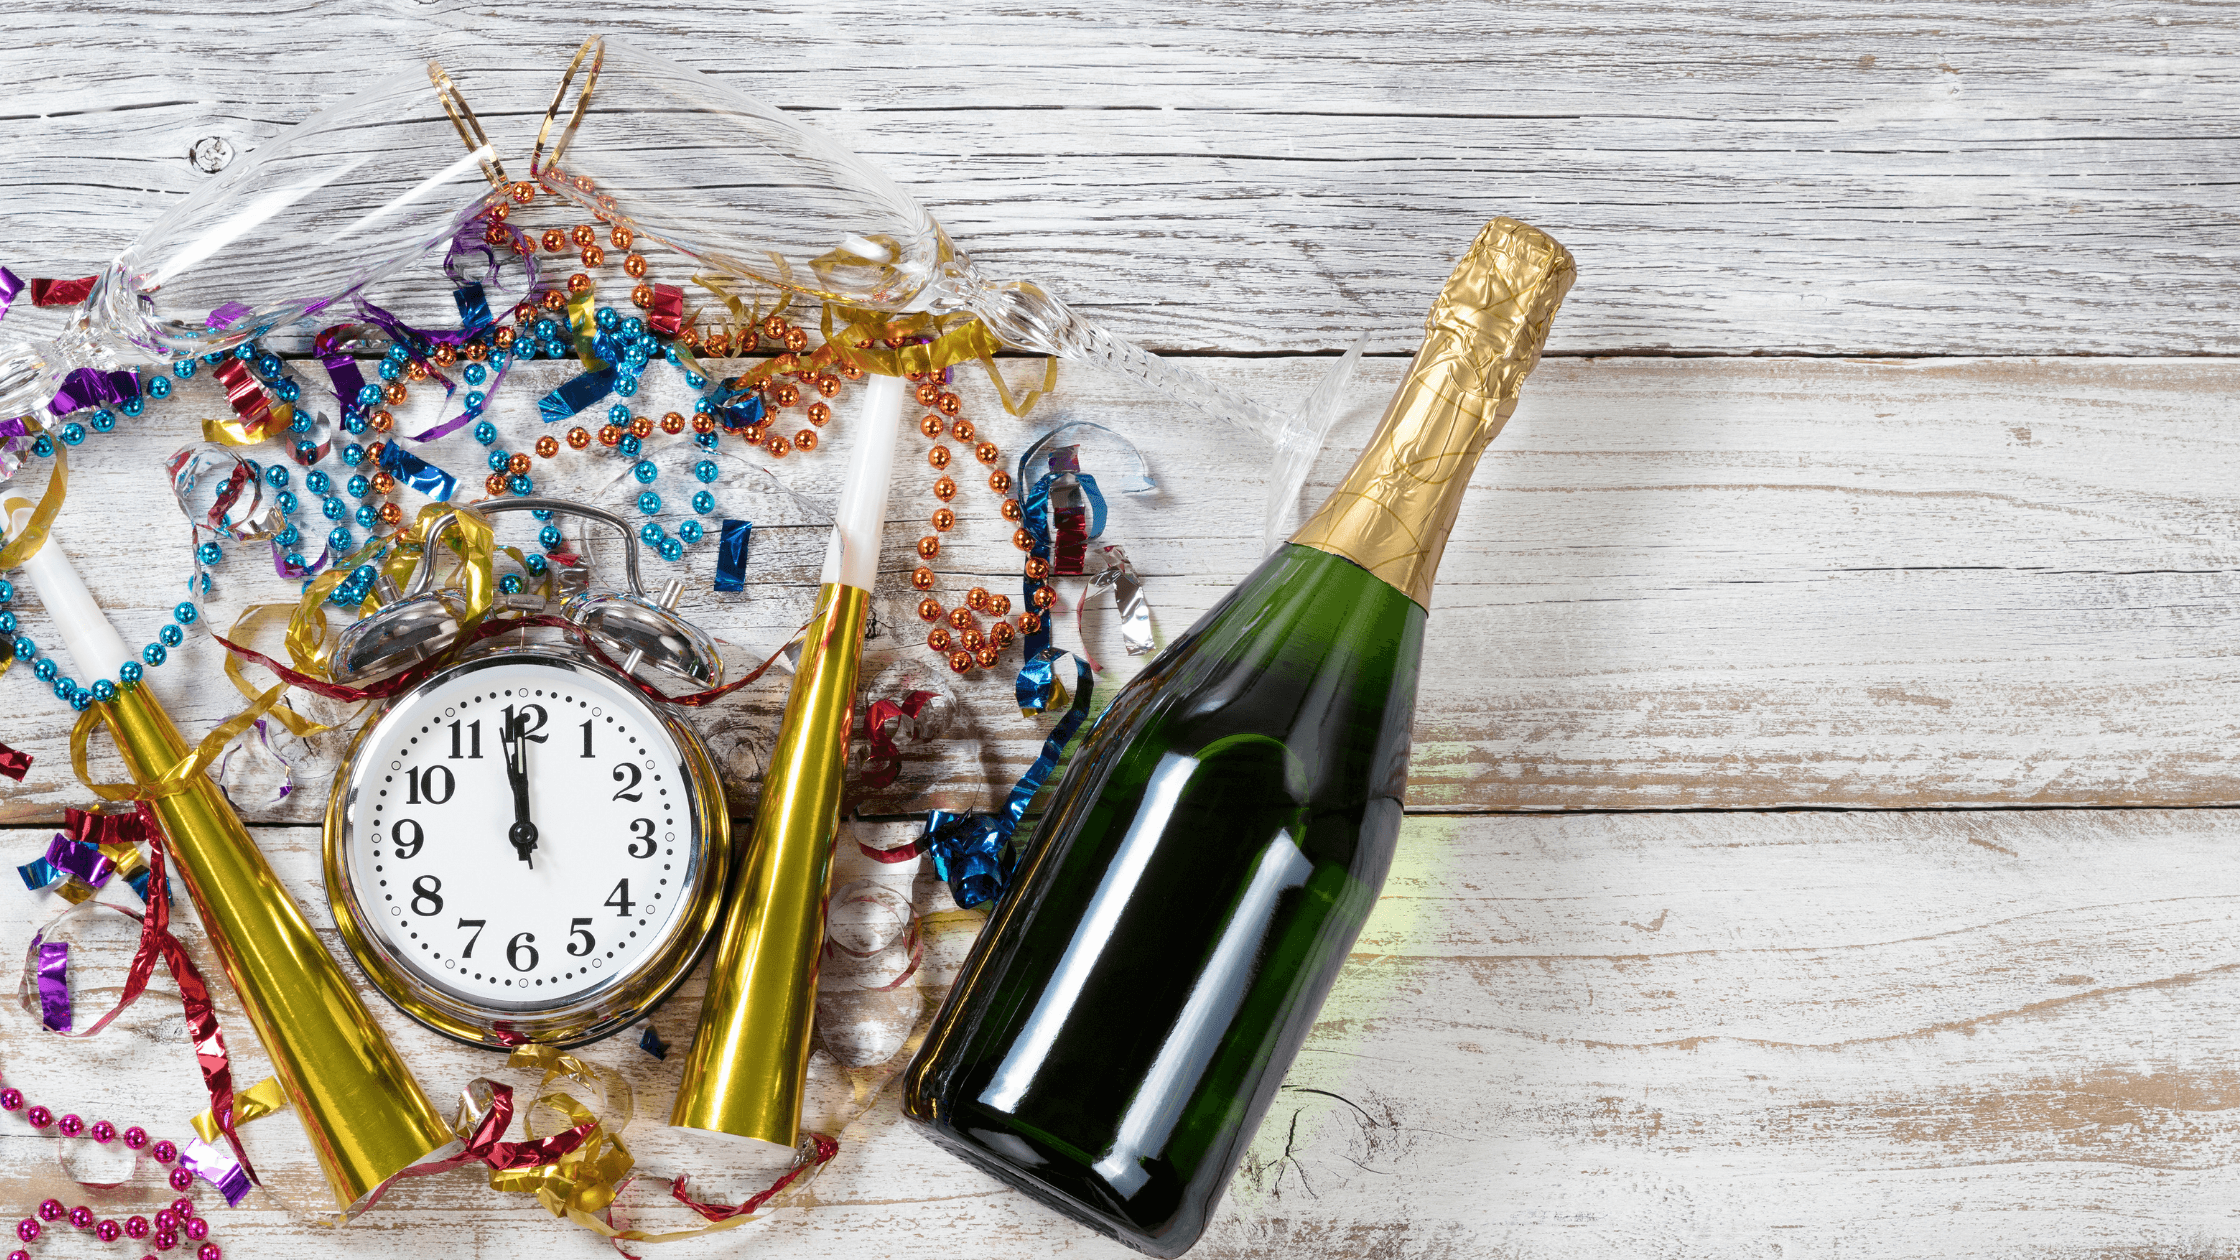 Why Most New Year's Resolutions Fail